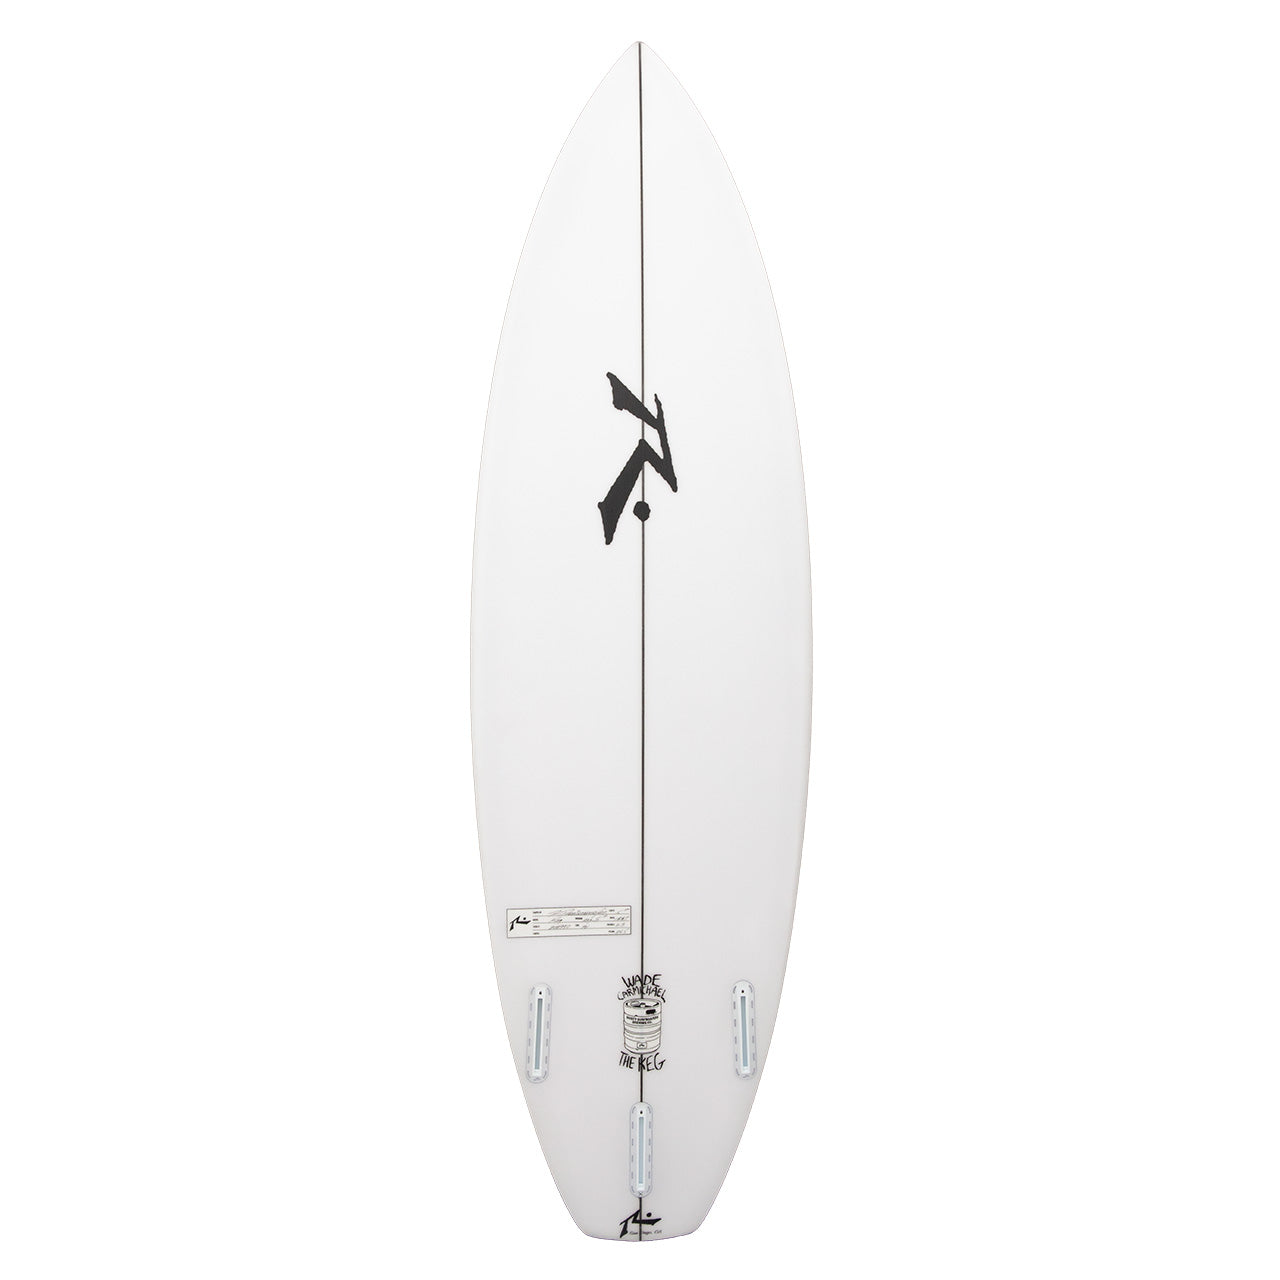 The Keg - High Performance Shortboard - Rusty Surfboards - Top View